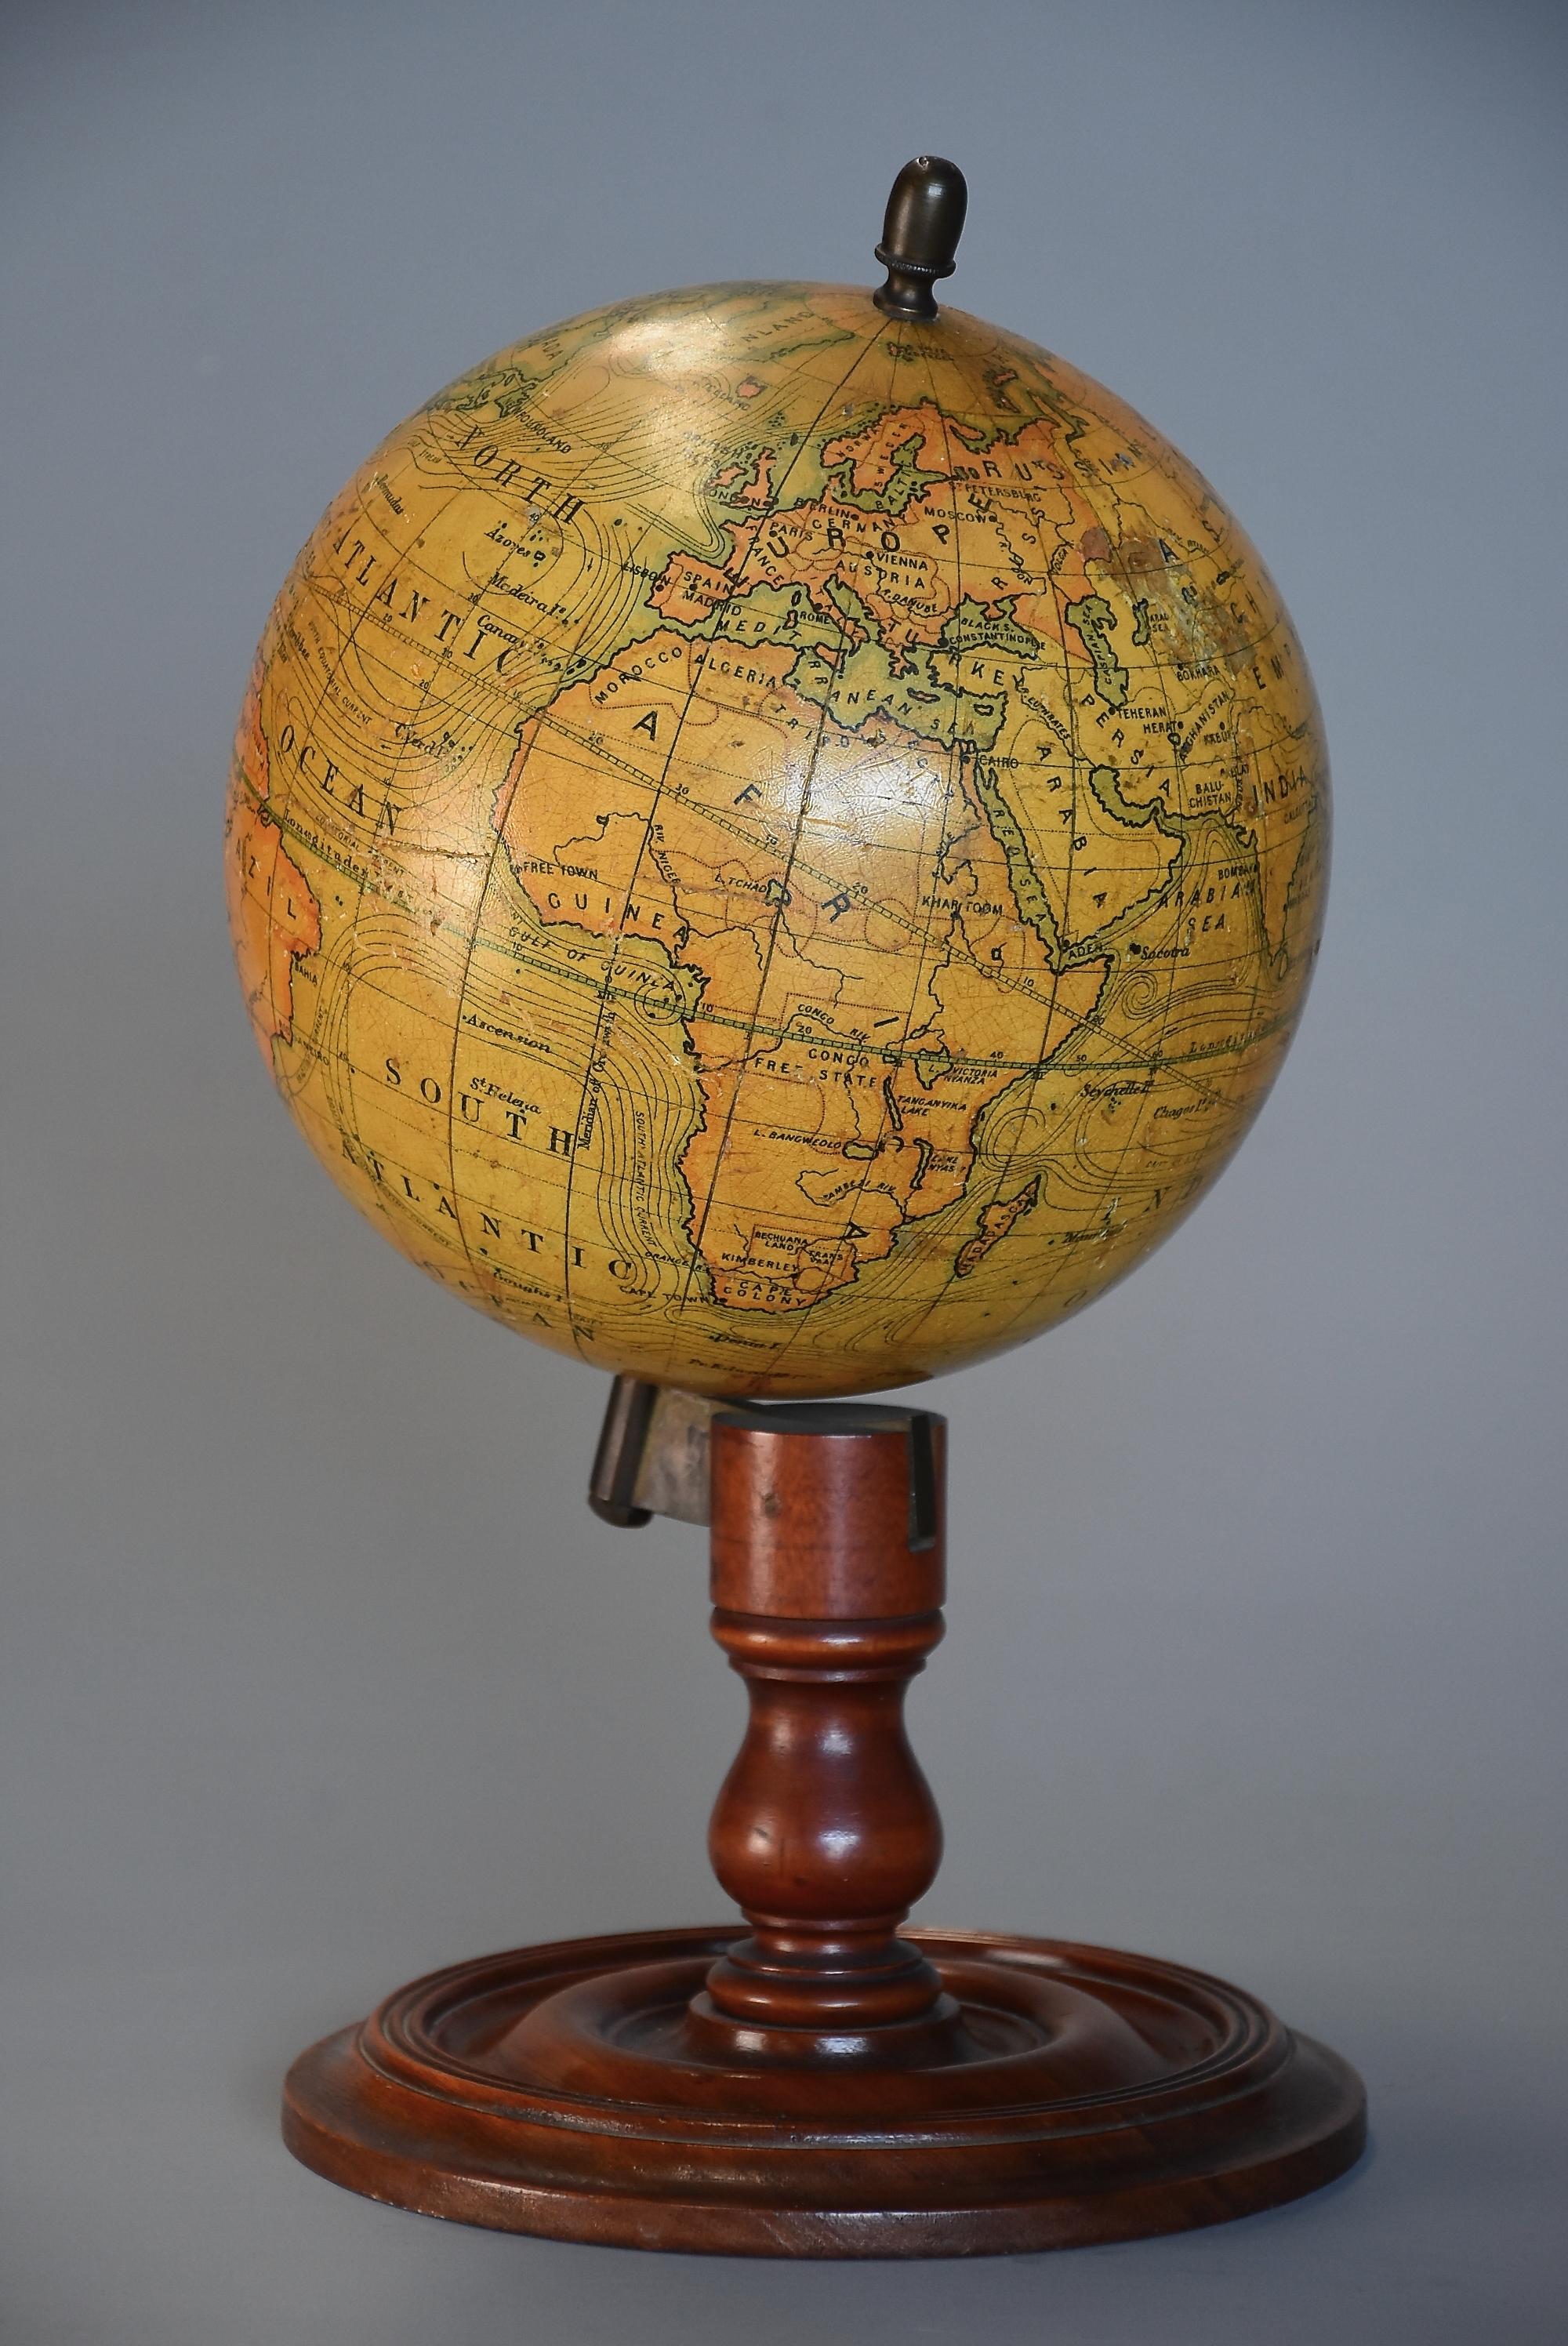 An early 20th century educational table globe by E.J. Arnold & Sons Ltd. Leeds.

This table globe is in good, original condition, the globe fully rotates and is supported on a turned mahogany base. 

This item is in good, original condition for